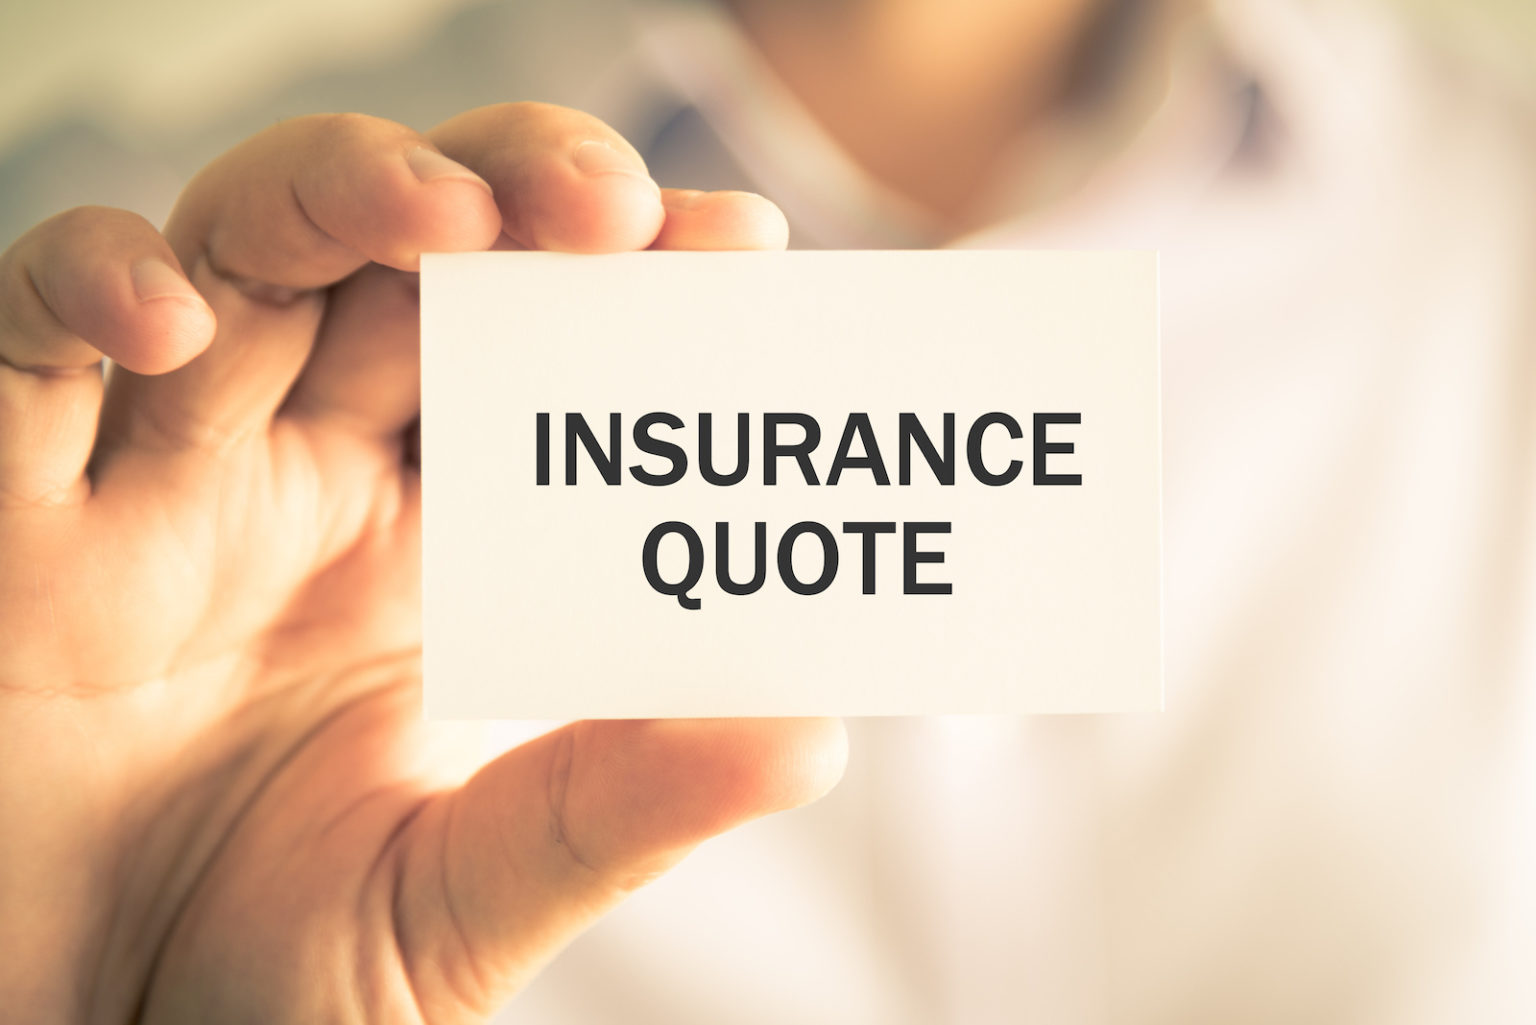 Business Insurance Quotes Get a free quote now